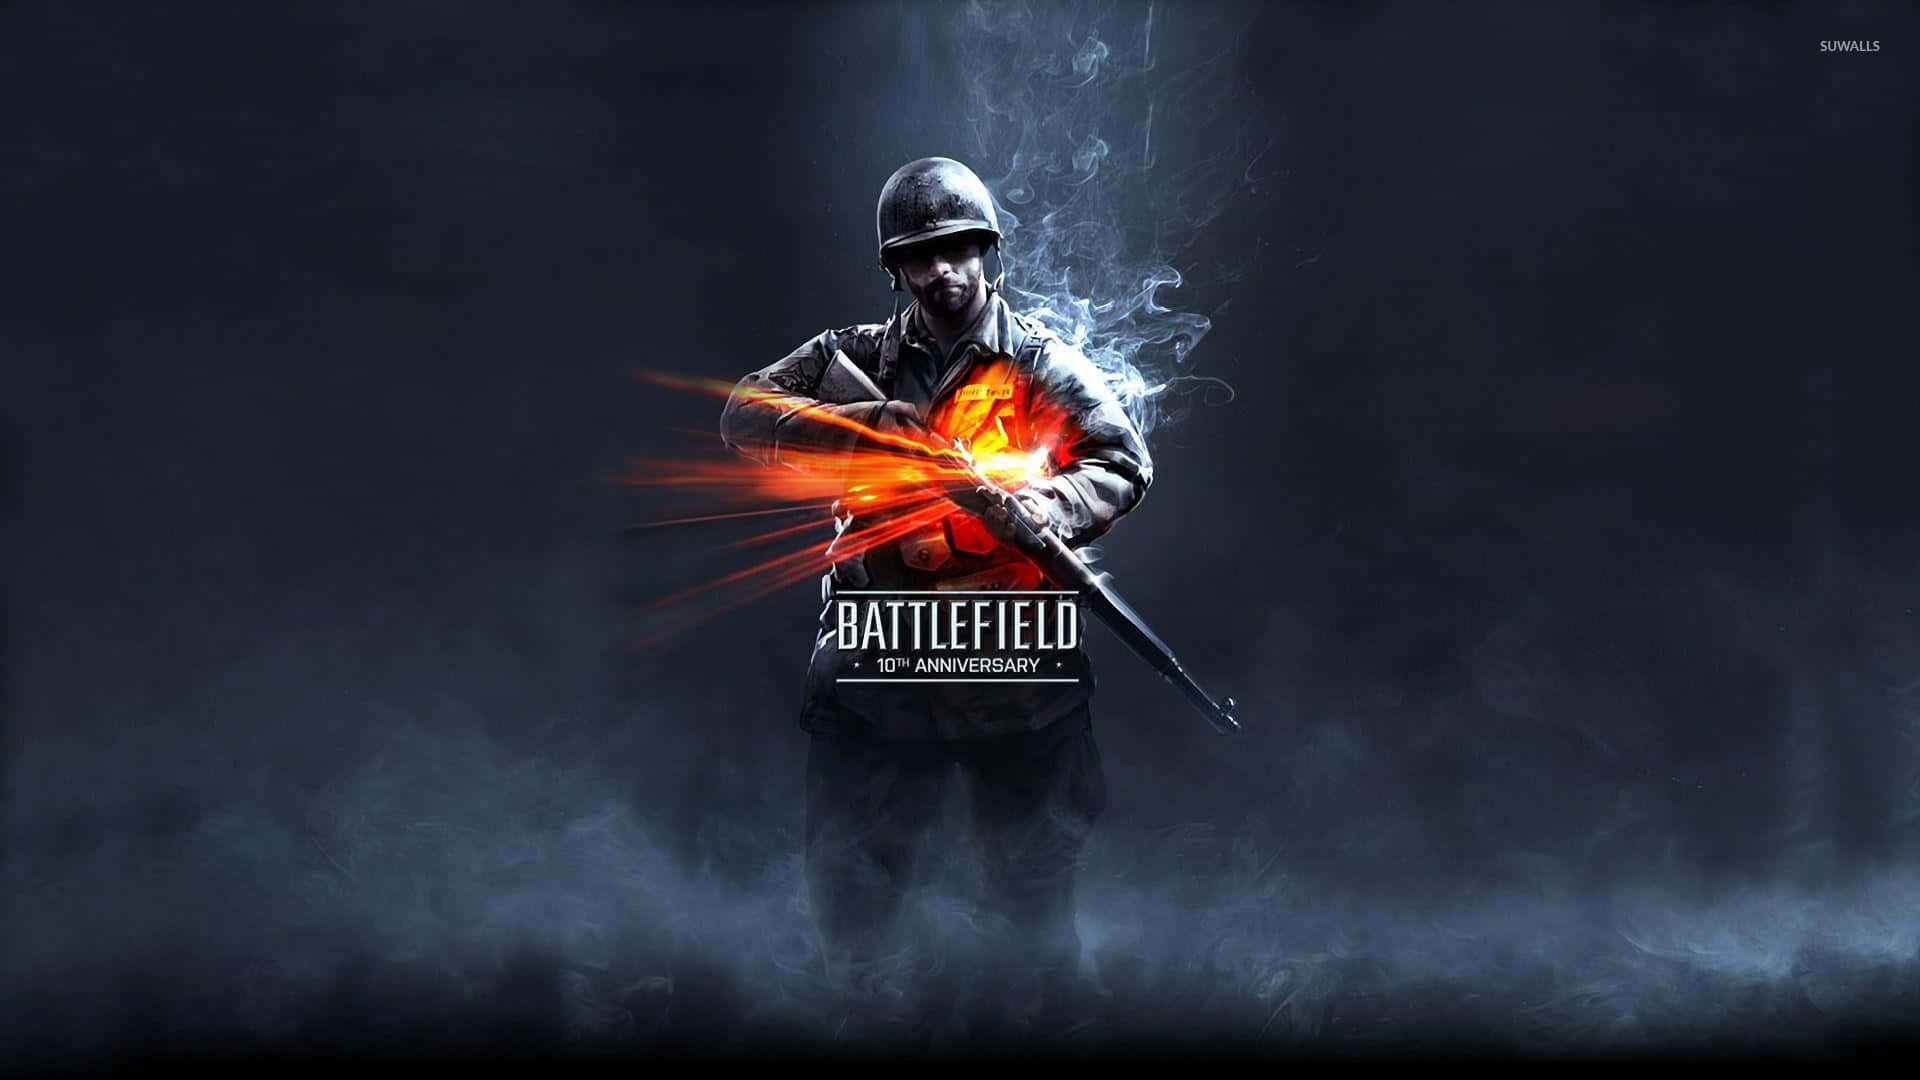 Conquer the Battlefield with Battlefield V!